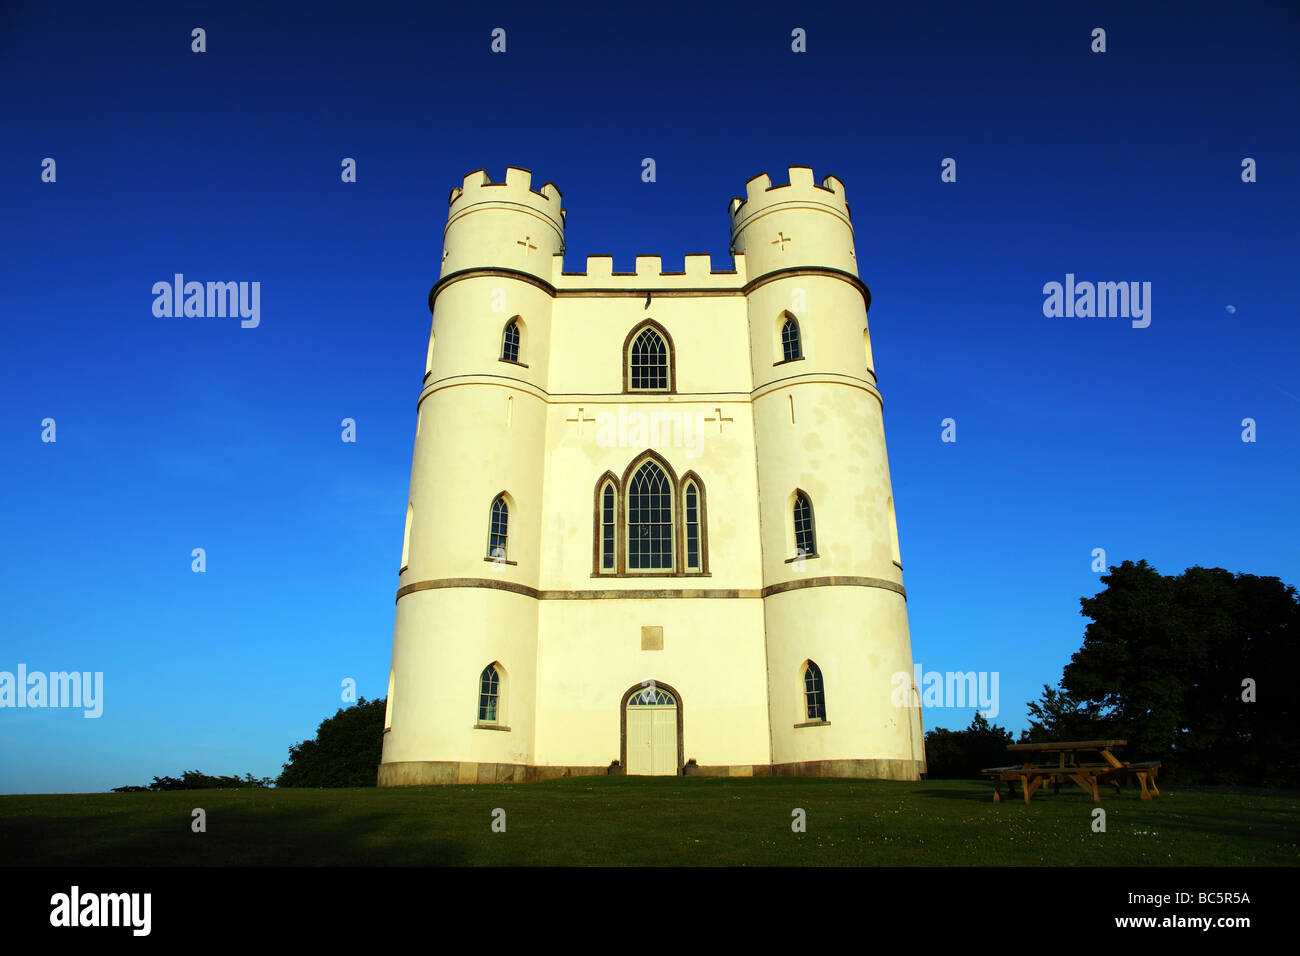 Lawrence Castle, is a Grade II* listed triangular tower, originally built in 1788 by Sir Robert Palk Stock Photo